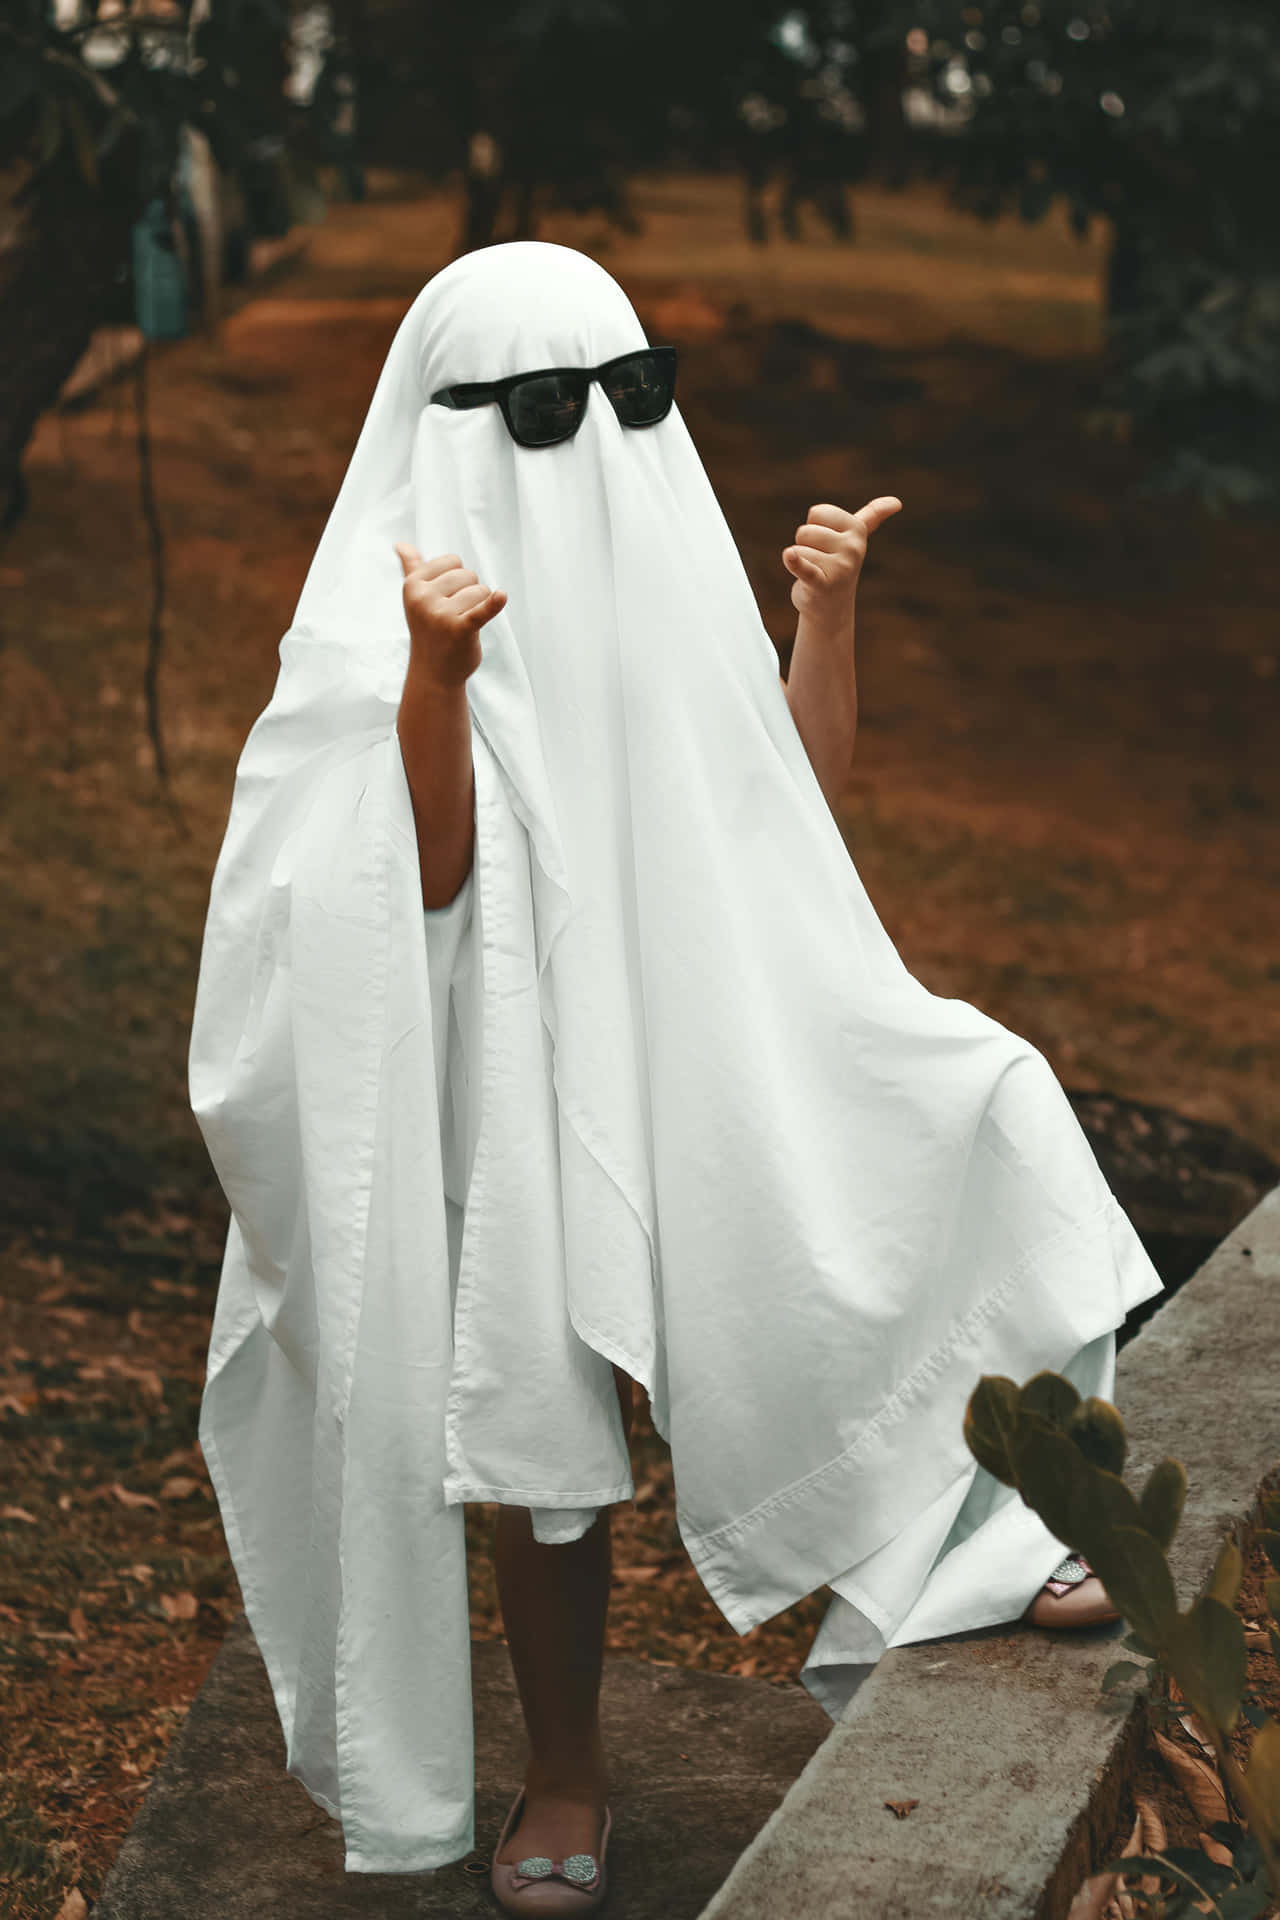 Modern Ghost Costume Outdoors Thumbs Up Wallpaper